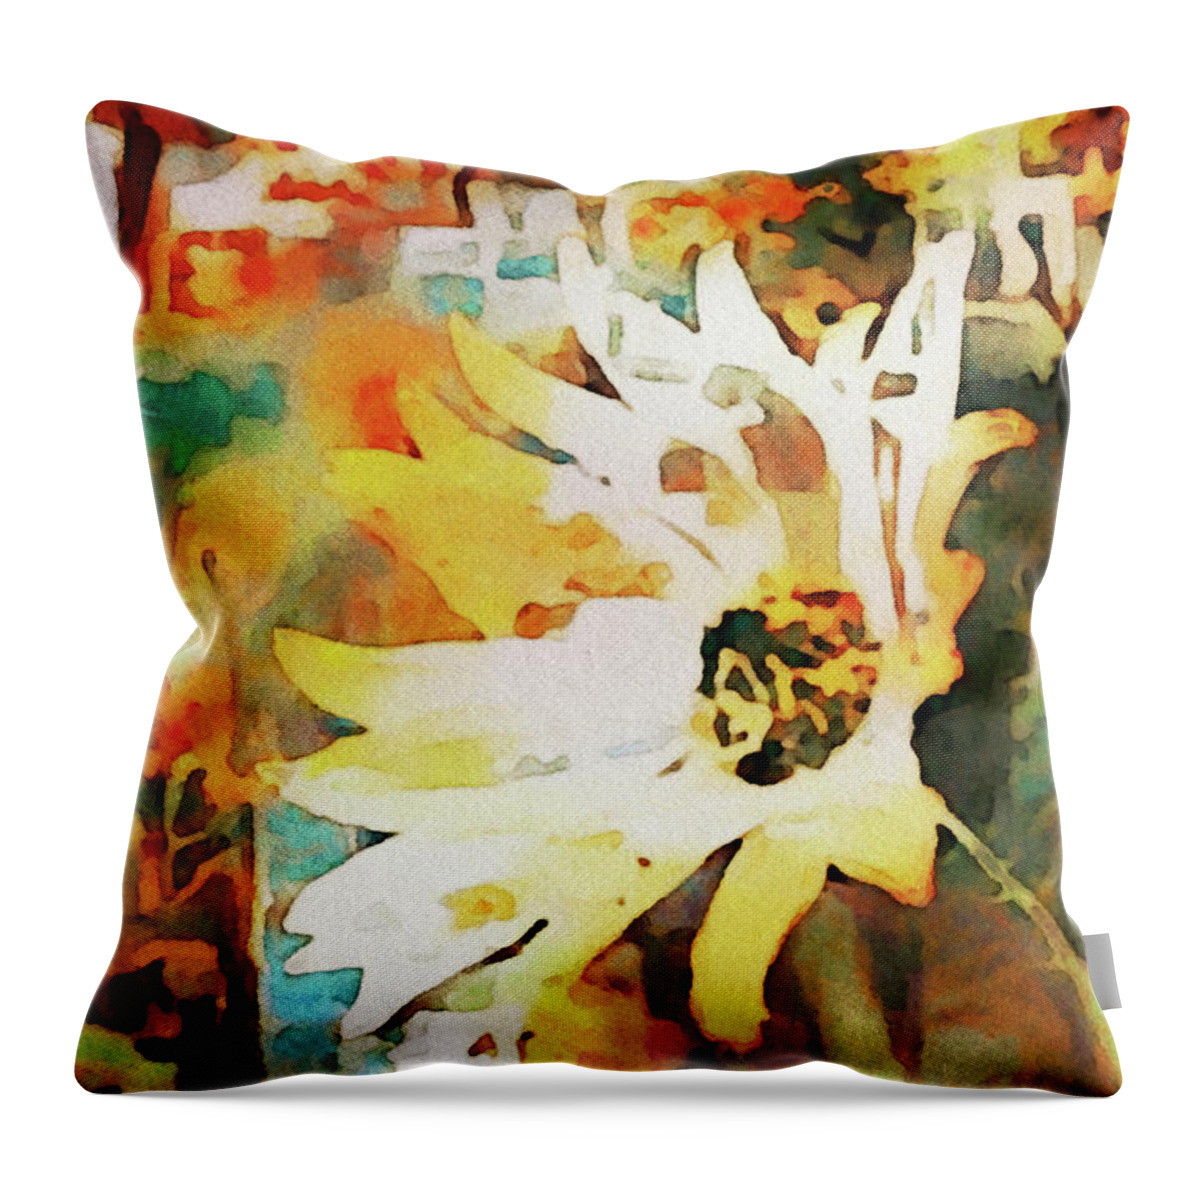 Daydreaming Daisies Throw Pillow featuring the painting Daydreaming Daisies by Susan Maxwell Schmidt